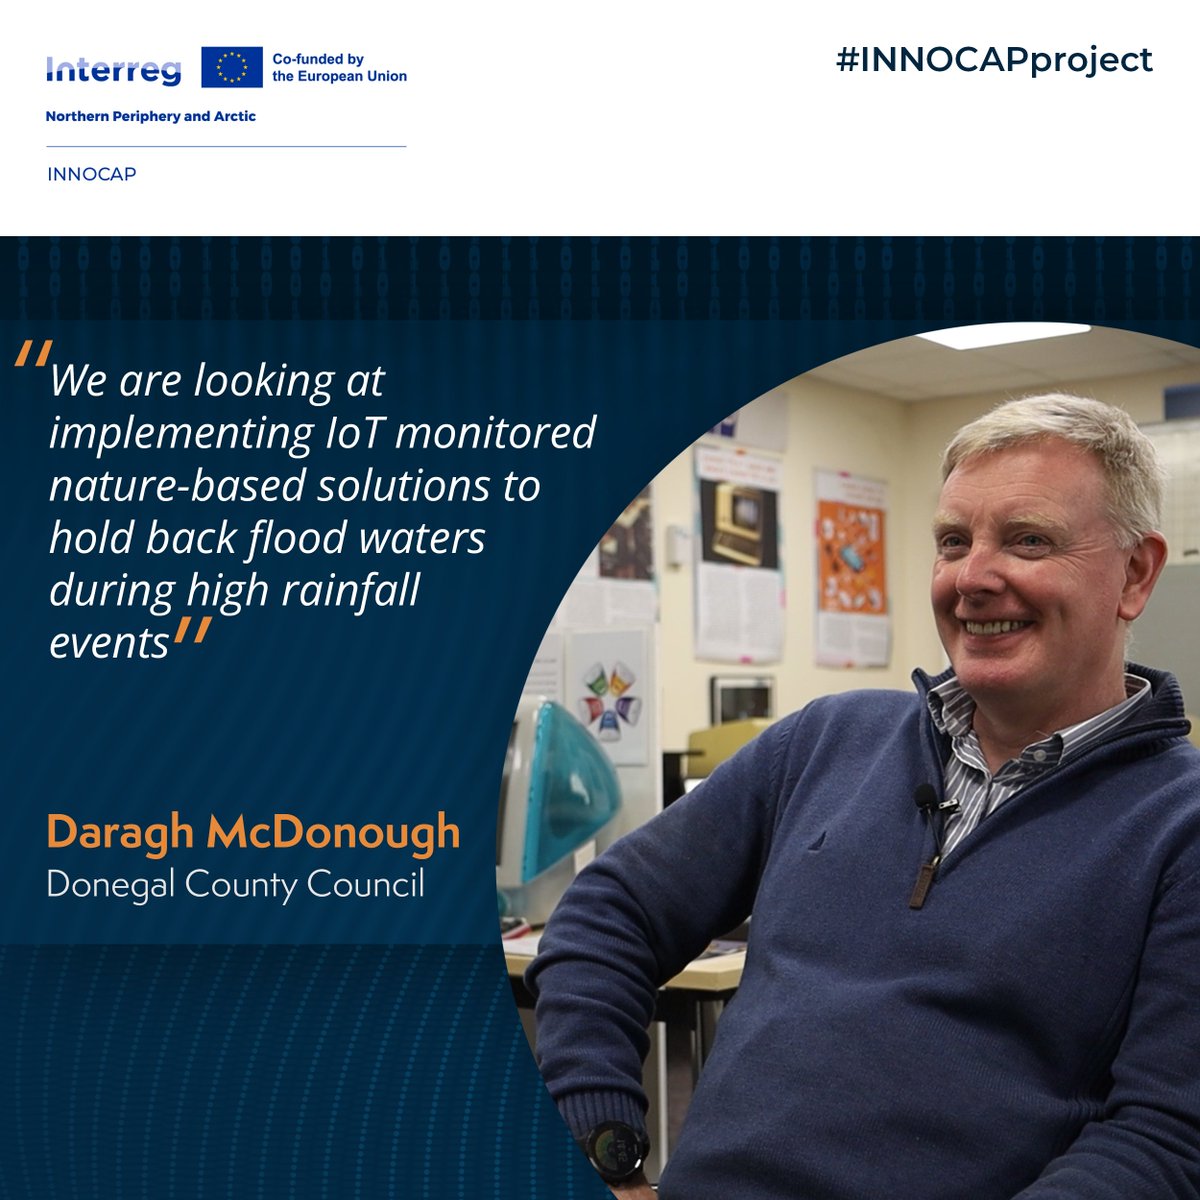 #INNOCAPproject partner @DaraghDonegal from @donegalcouncil 🇮🇪 about the #IoT solutions that the council will be implementing through this #interreg project. Watch the video: vimeo.com/907440098 @NPA2014_2020 @DonegalMaps @Donegal_ie